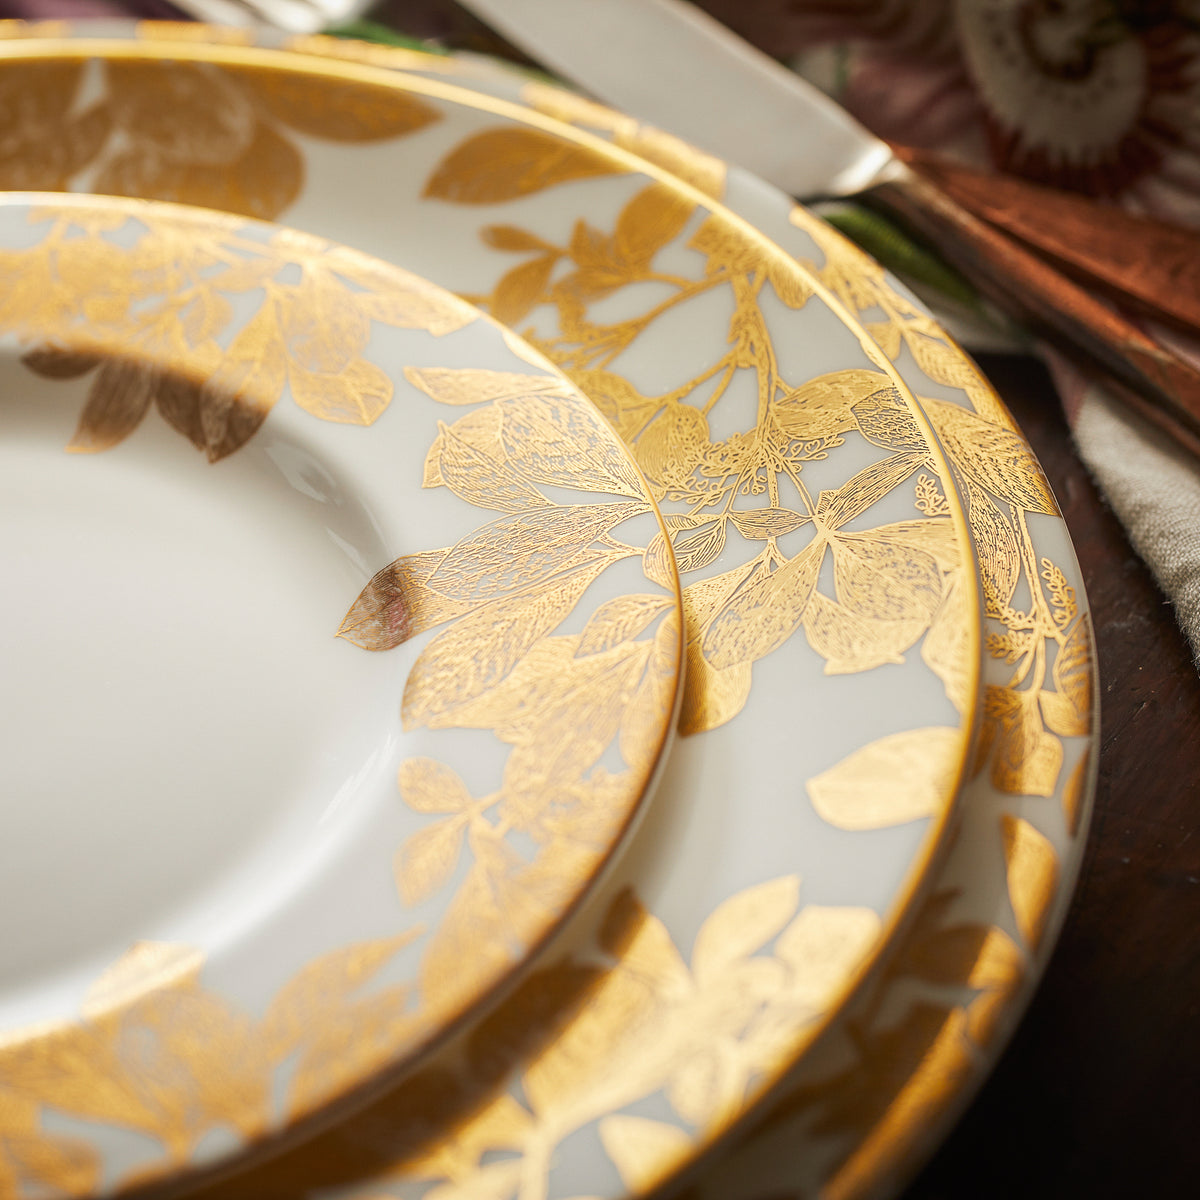 A set of Arbor Rimmed Charger Gold plates from Caskata Artisanal Home, an exquisite addition to any dining experience. Each plate features intricate patterns crafted from luxurious gold leaf, creating a stunning visual impact. Elevate your dining experience with these elegant plates.